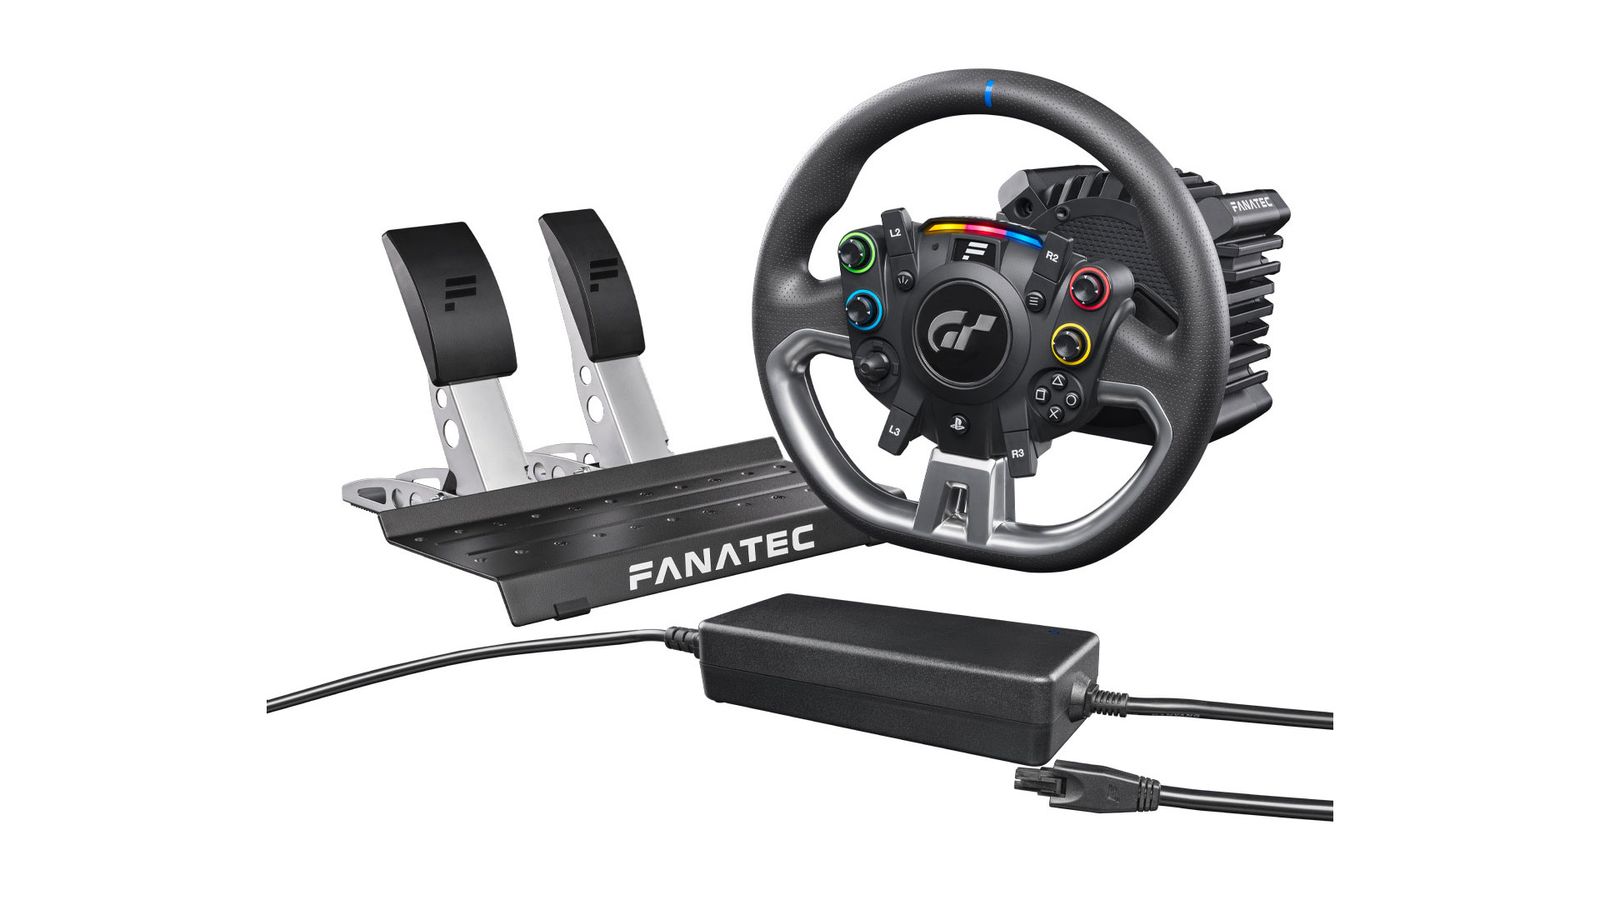 Fanatec Gran Turismo DD Pro product image of a black wheel with multi-coloured buttons and black pedals.